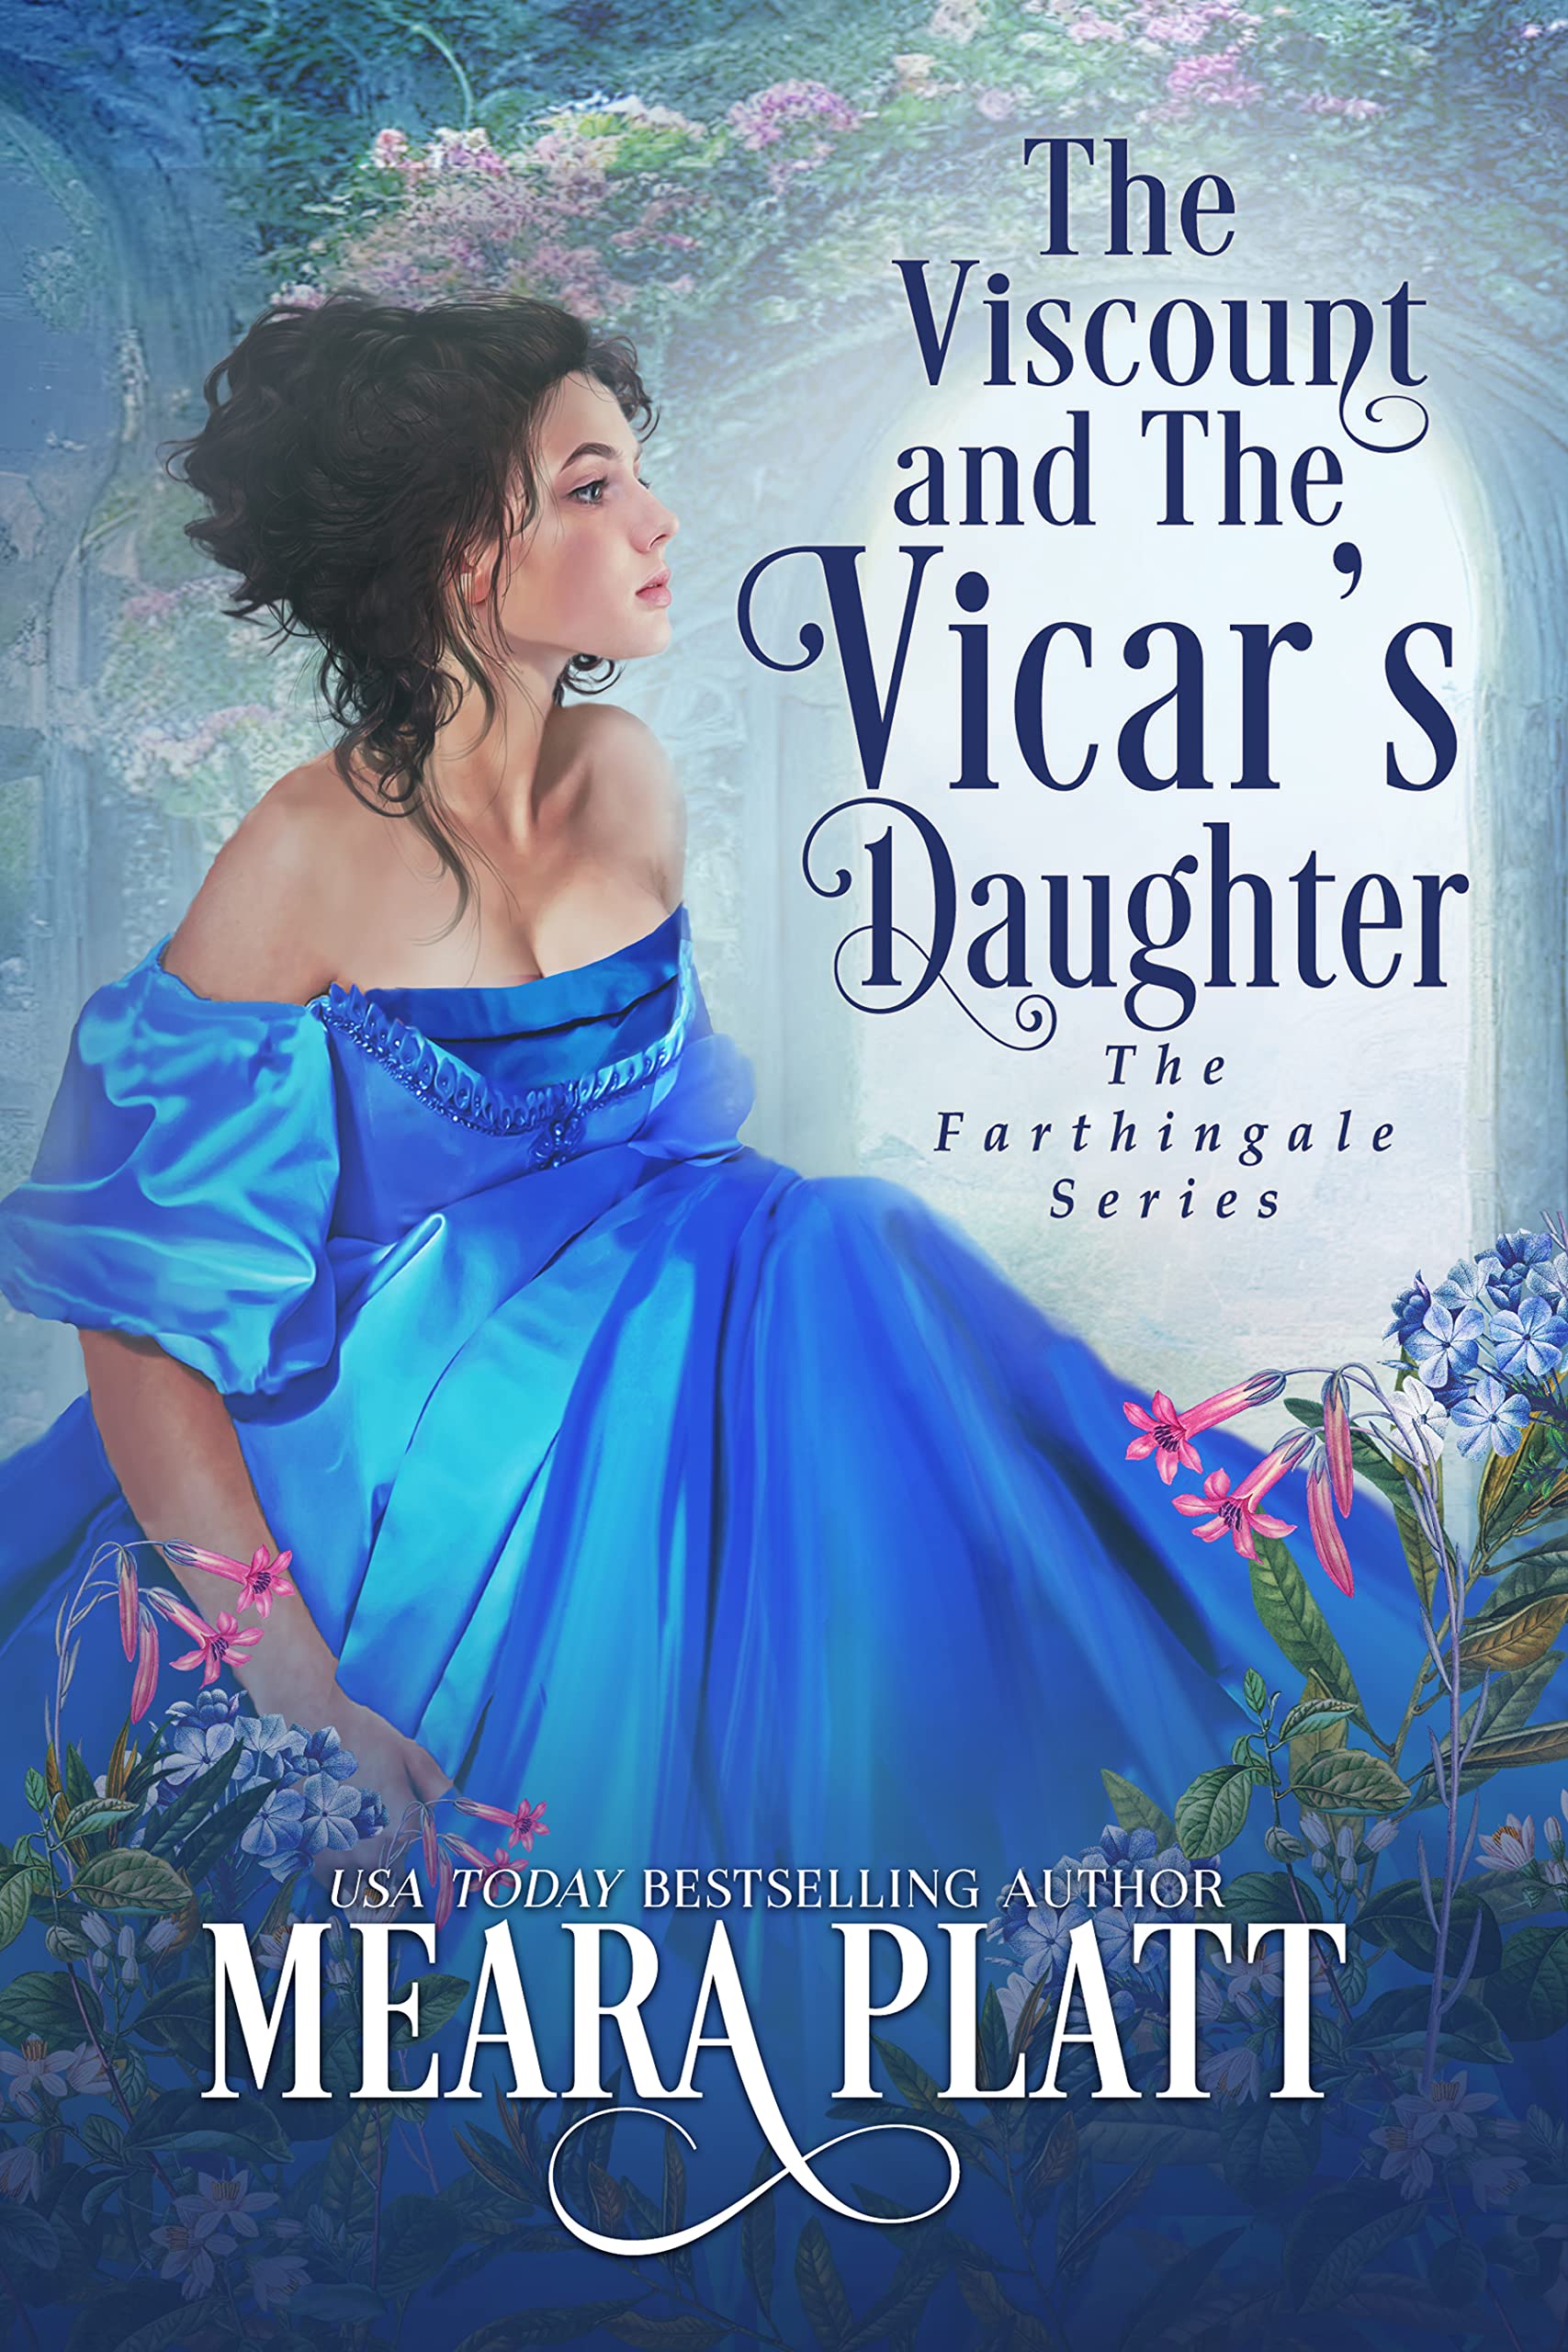 The Viscount and The Vicar's Daughter (The Farthingale Series Book 7)